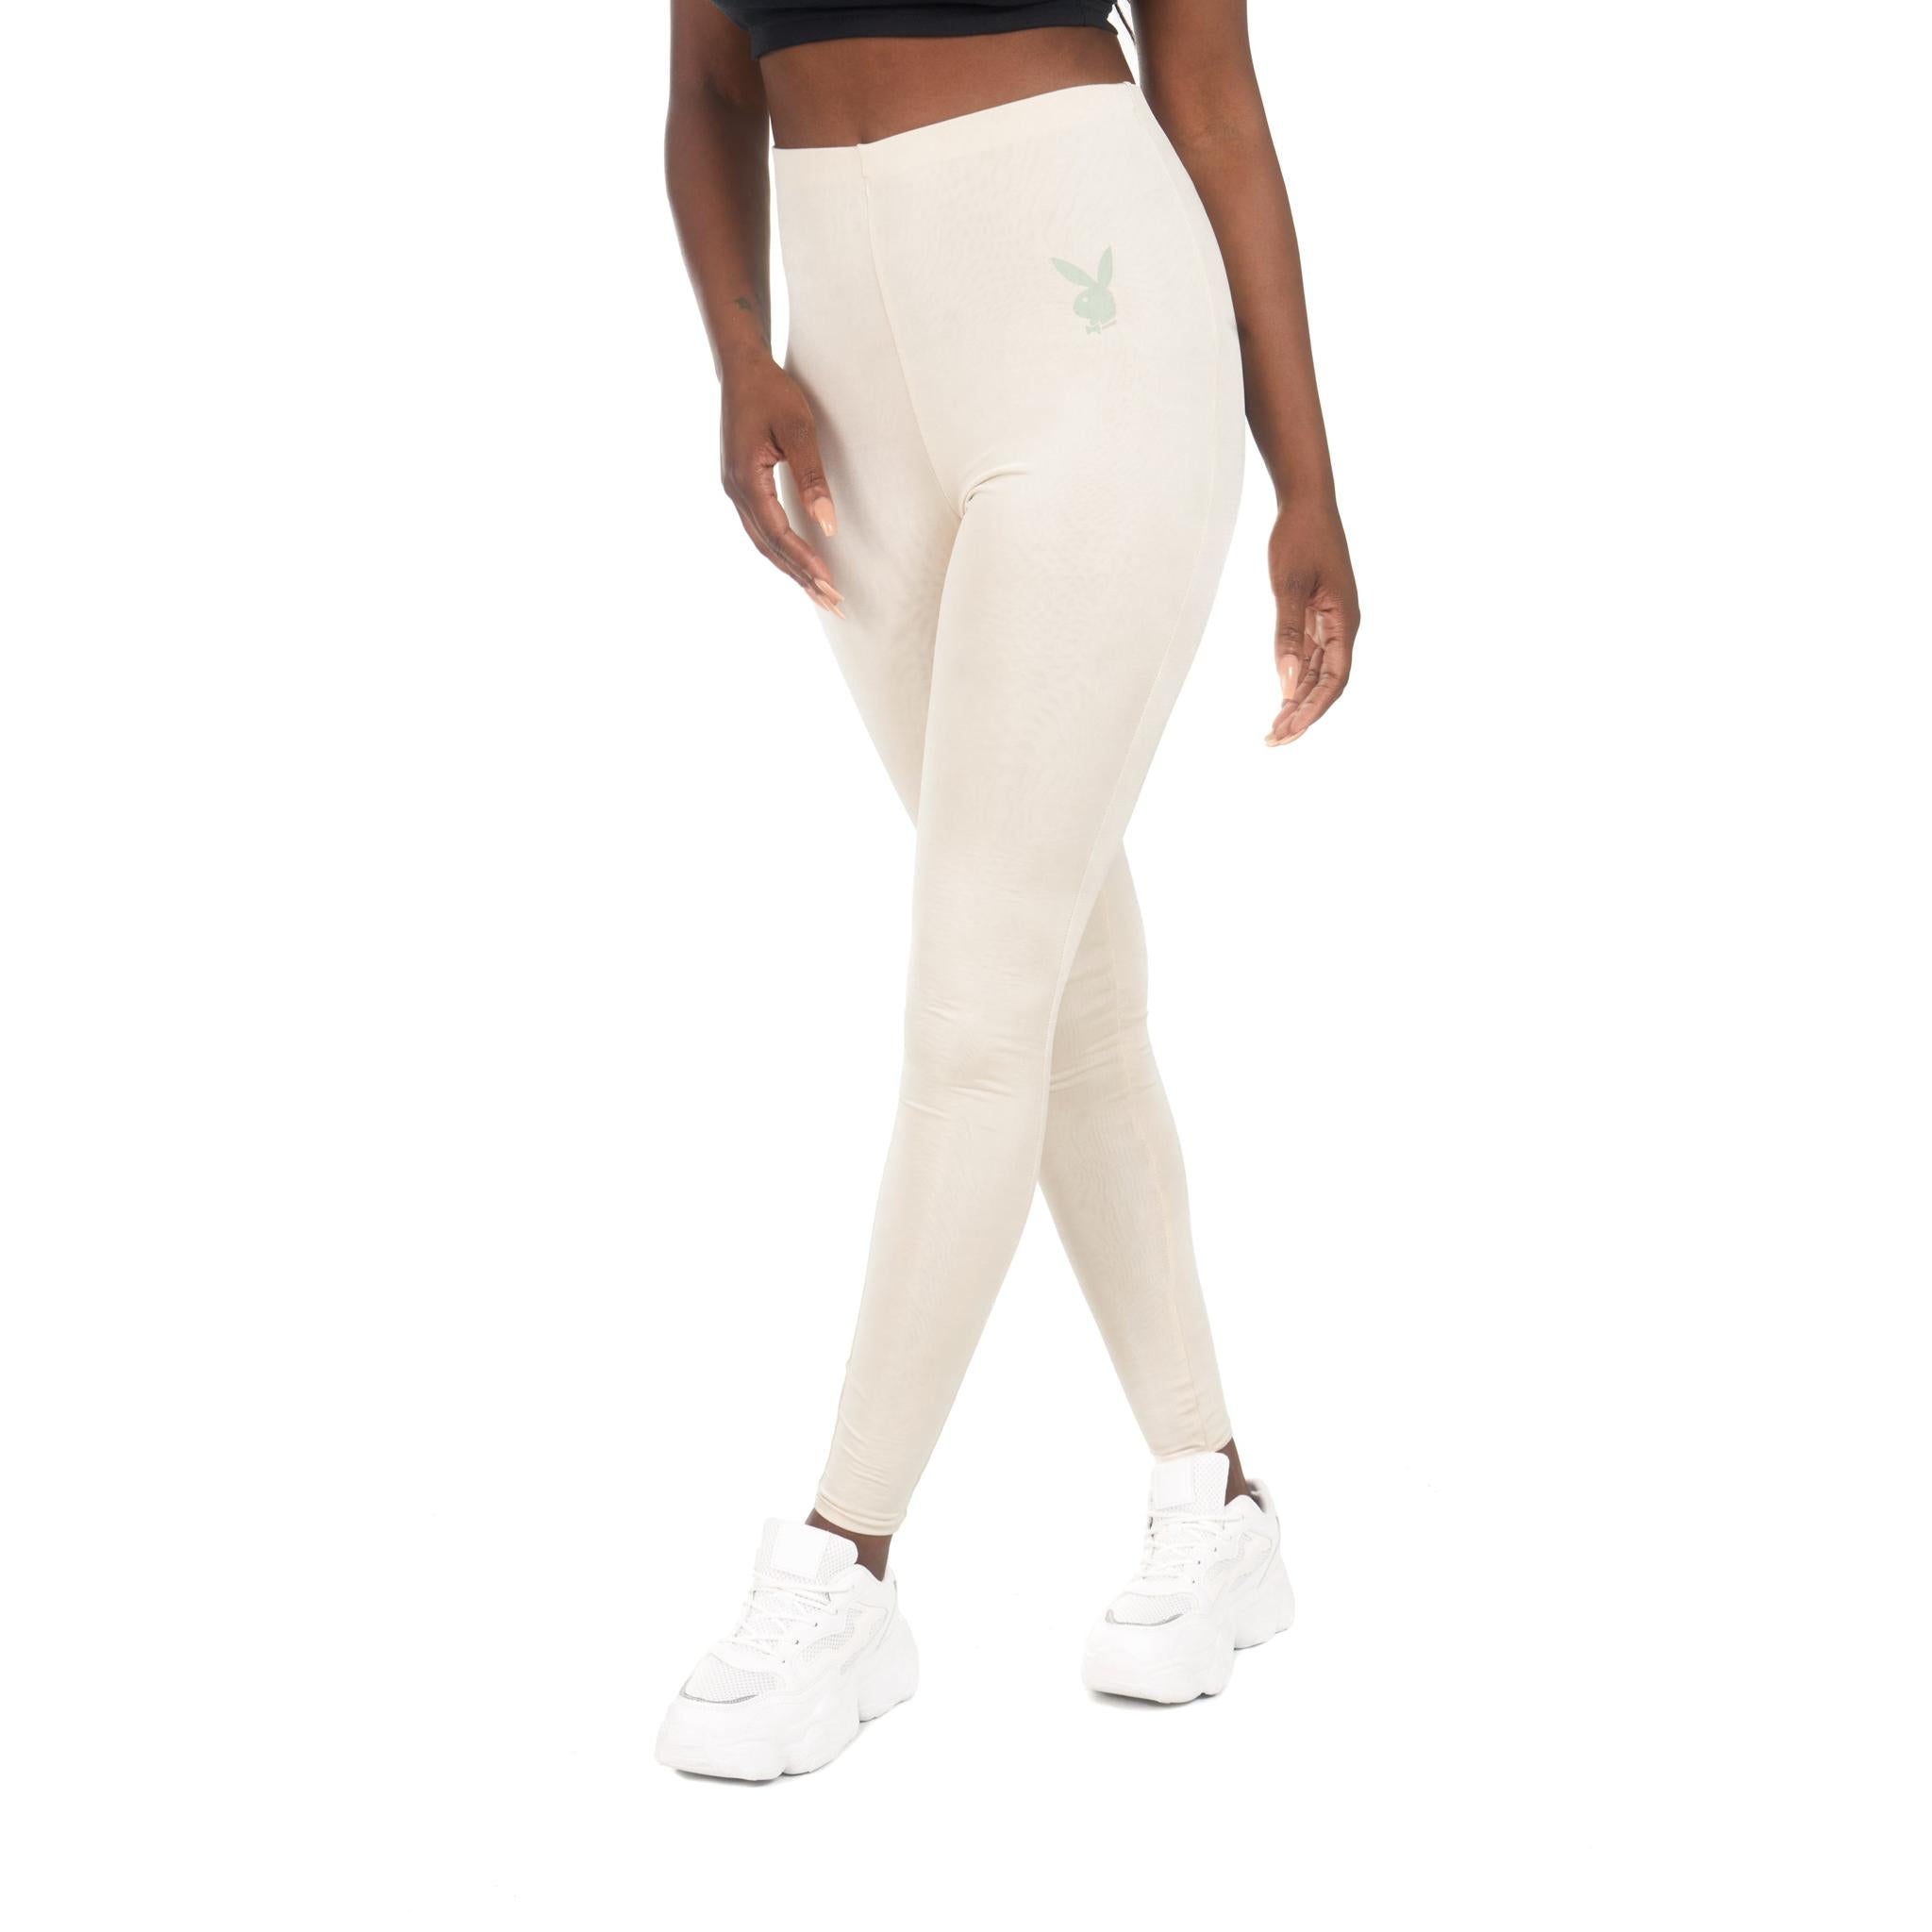 NWT PLAYBOY MISSGUIDED Ivory Lifestyle Soft Touch Stretch Leggings